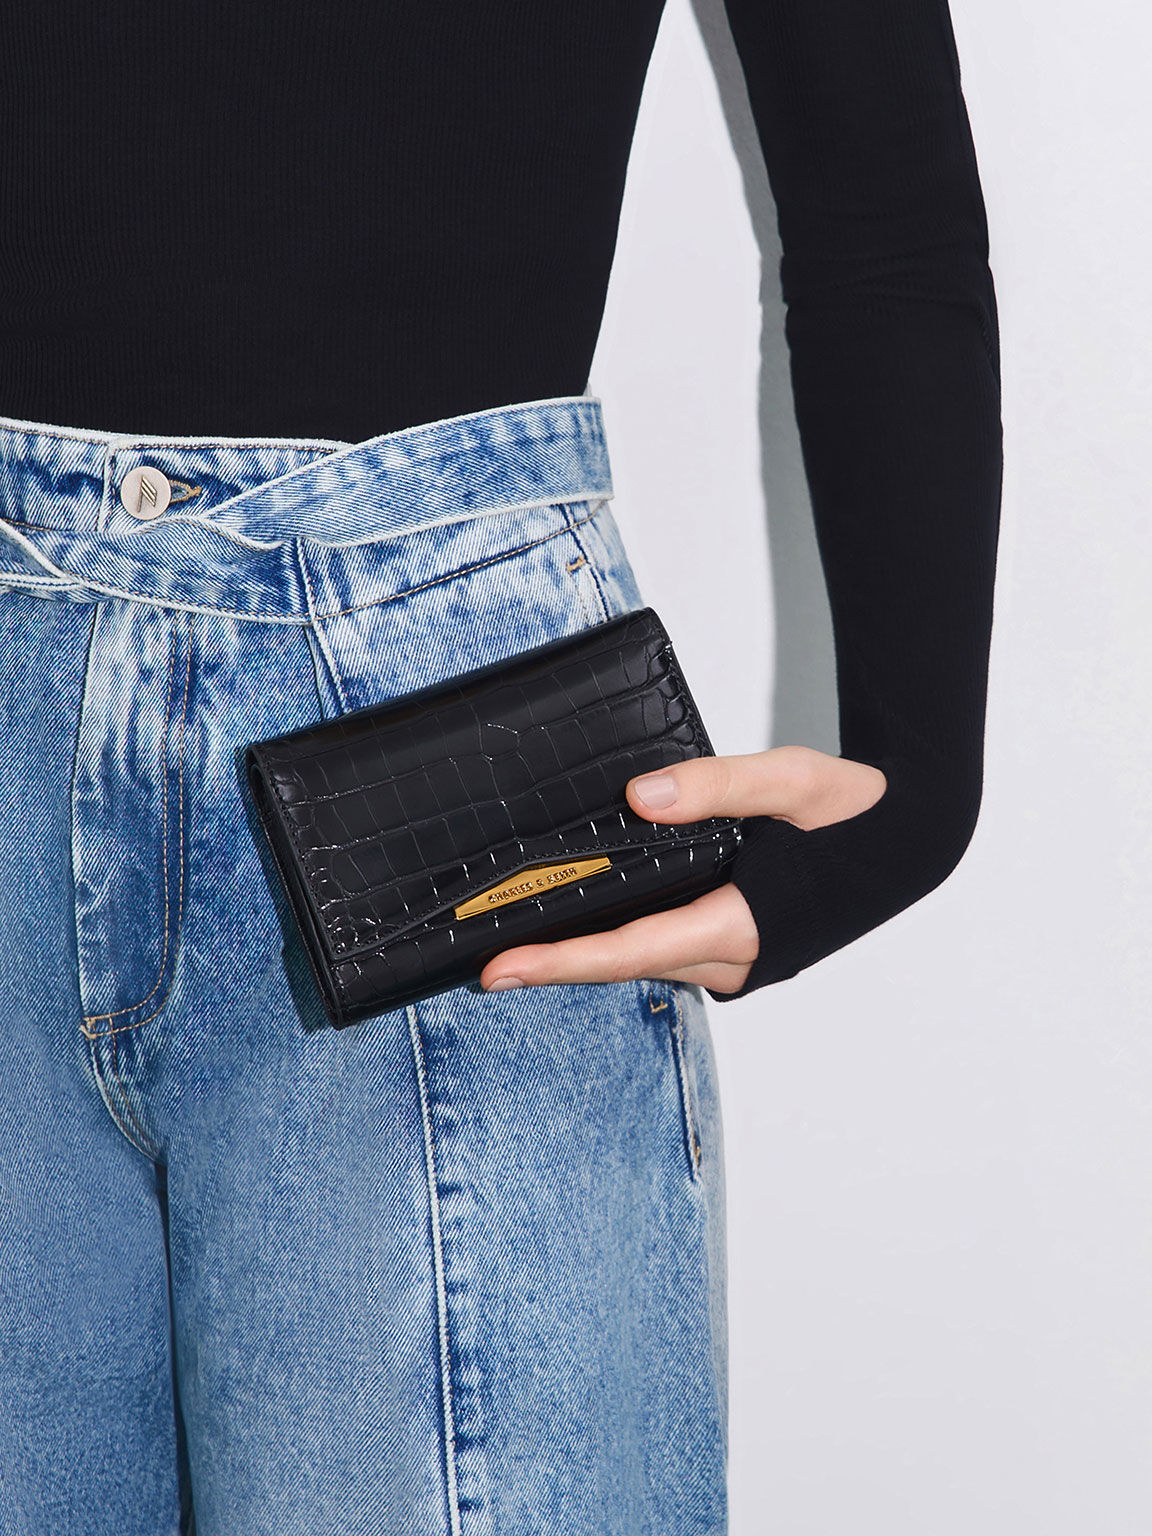 Black Metallic Accent Short Wallet - CHARLES & KEITH ID